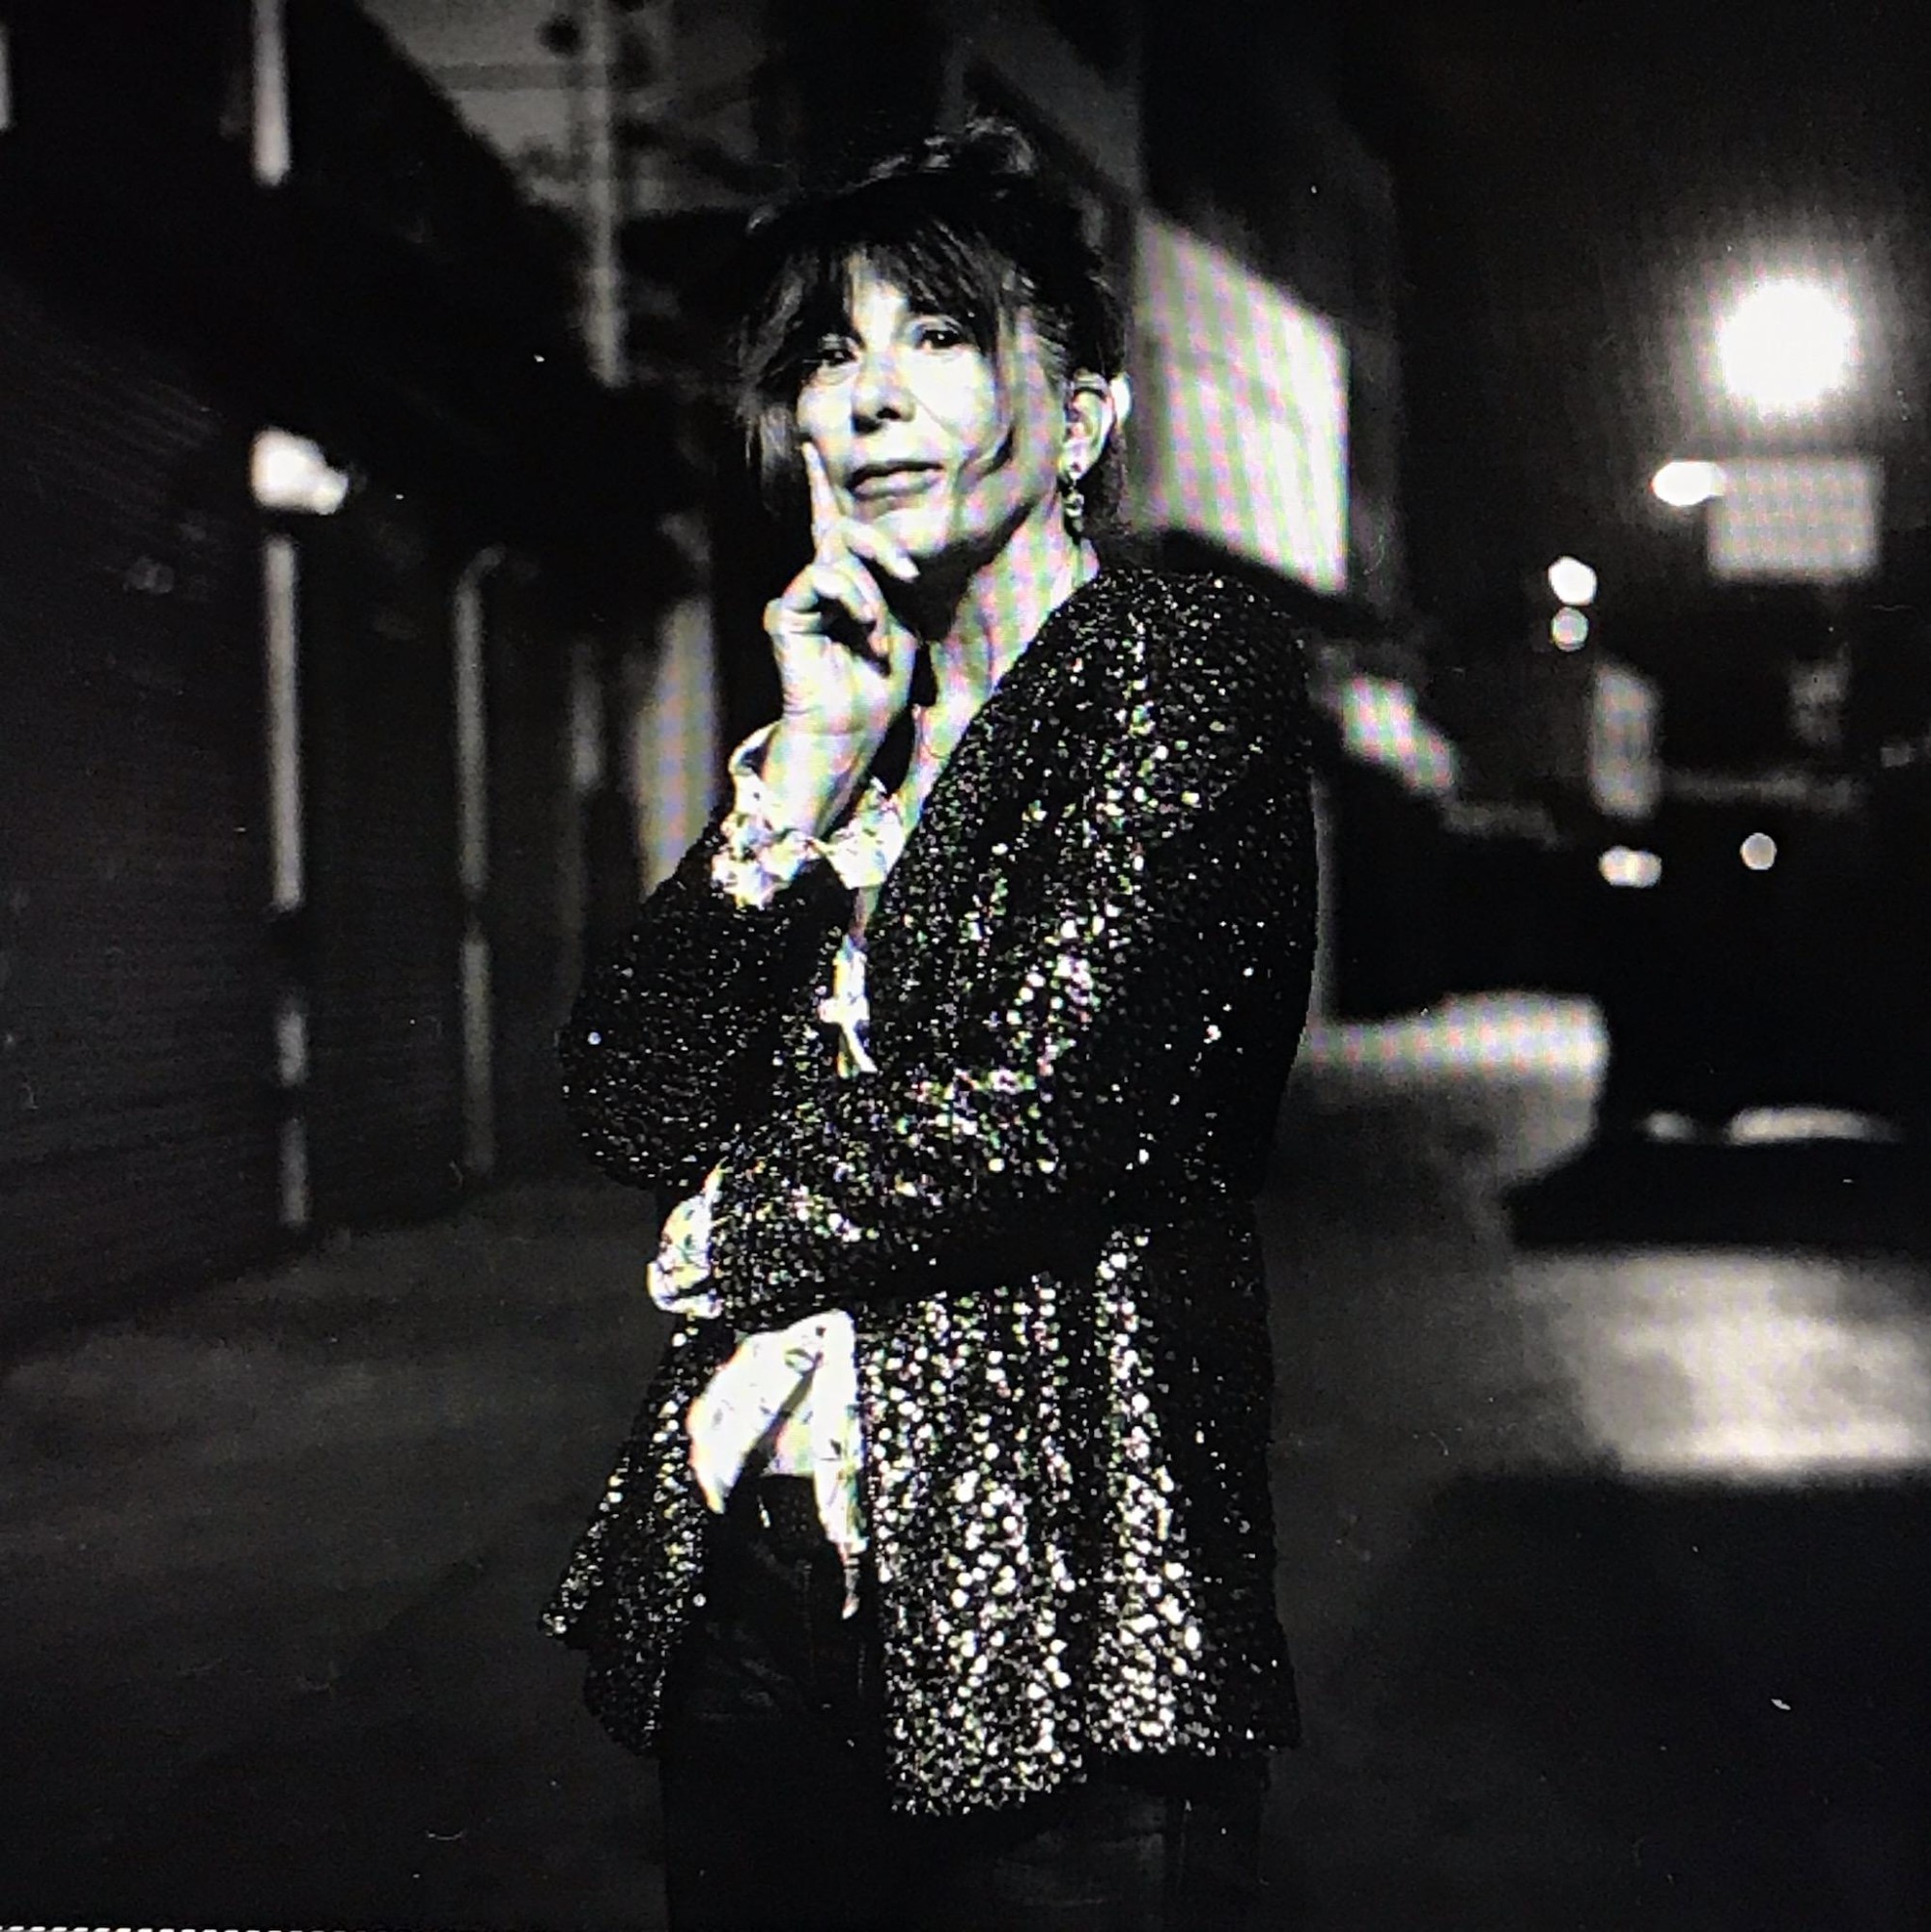 In this black and white portrait, Chris Kraus wears a sparkly jacket and looks at the camera with her face in her hand